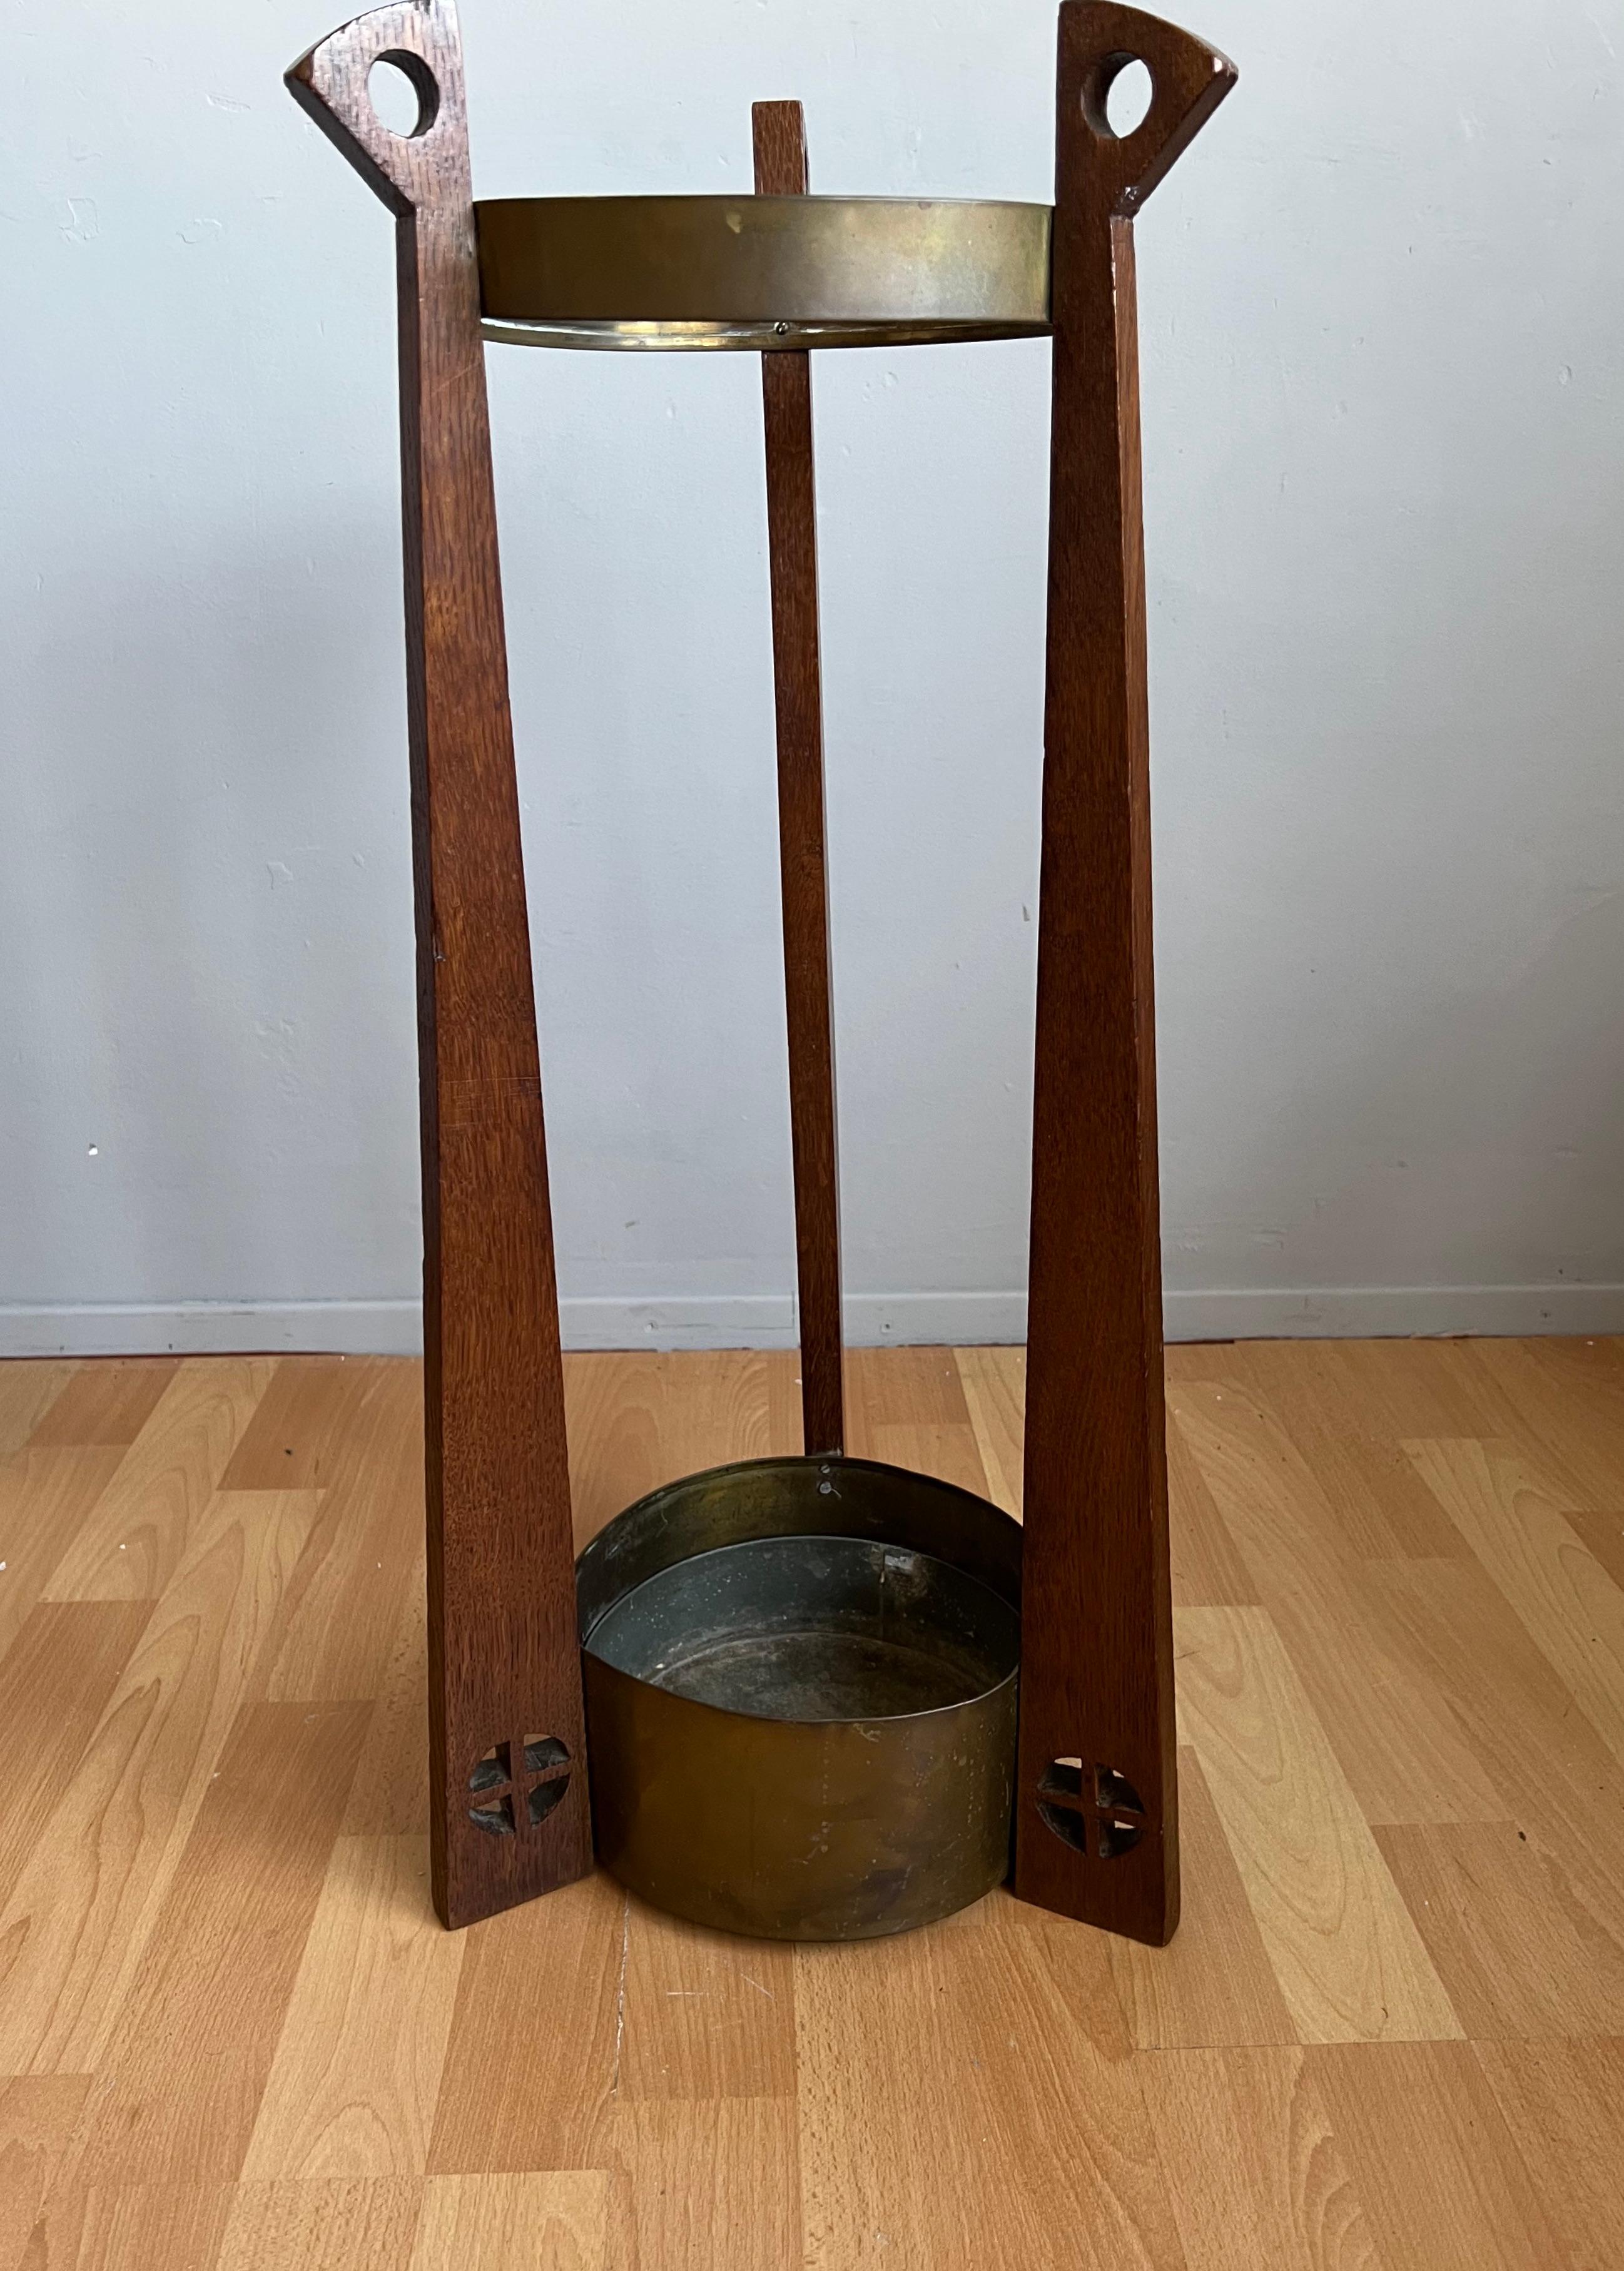 Gustave Serrurier-Bovy Brass and Oak Cane & Umbrella Stand with Zinc Liner In Good Condition For Sale In Lisse, NL